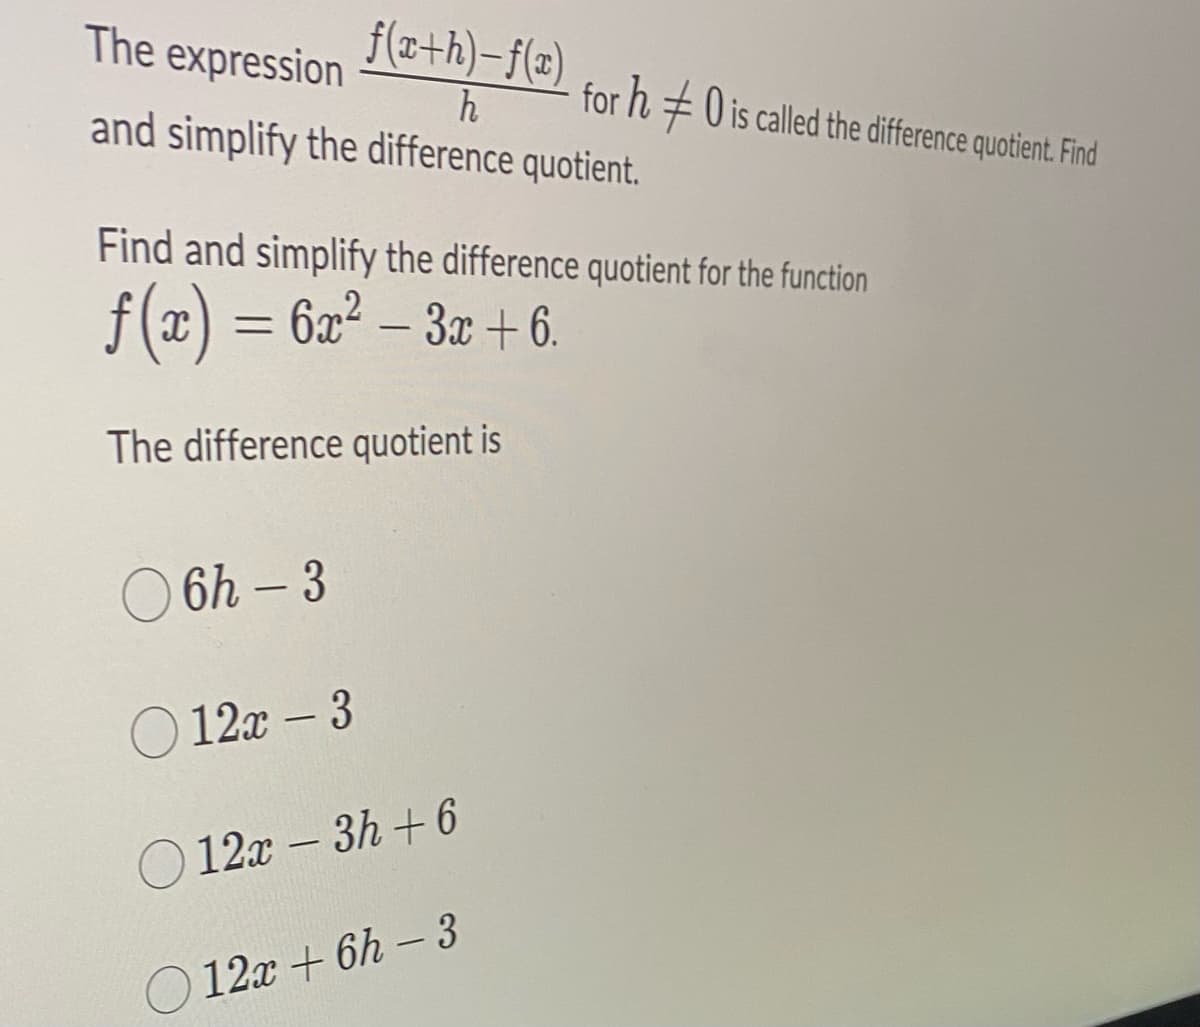 f(x+h)-f(x) for h ‡0 is called the difference quotient. Find
The expression
h
and simplify the difference quotient.
Find and simplify the difference quotient for the function
ƒ(x) = 6x² − 3x + 6.
The difference quotient is
○6h-3
12x - 3
12x - 3h+6
12x+6h-3